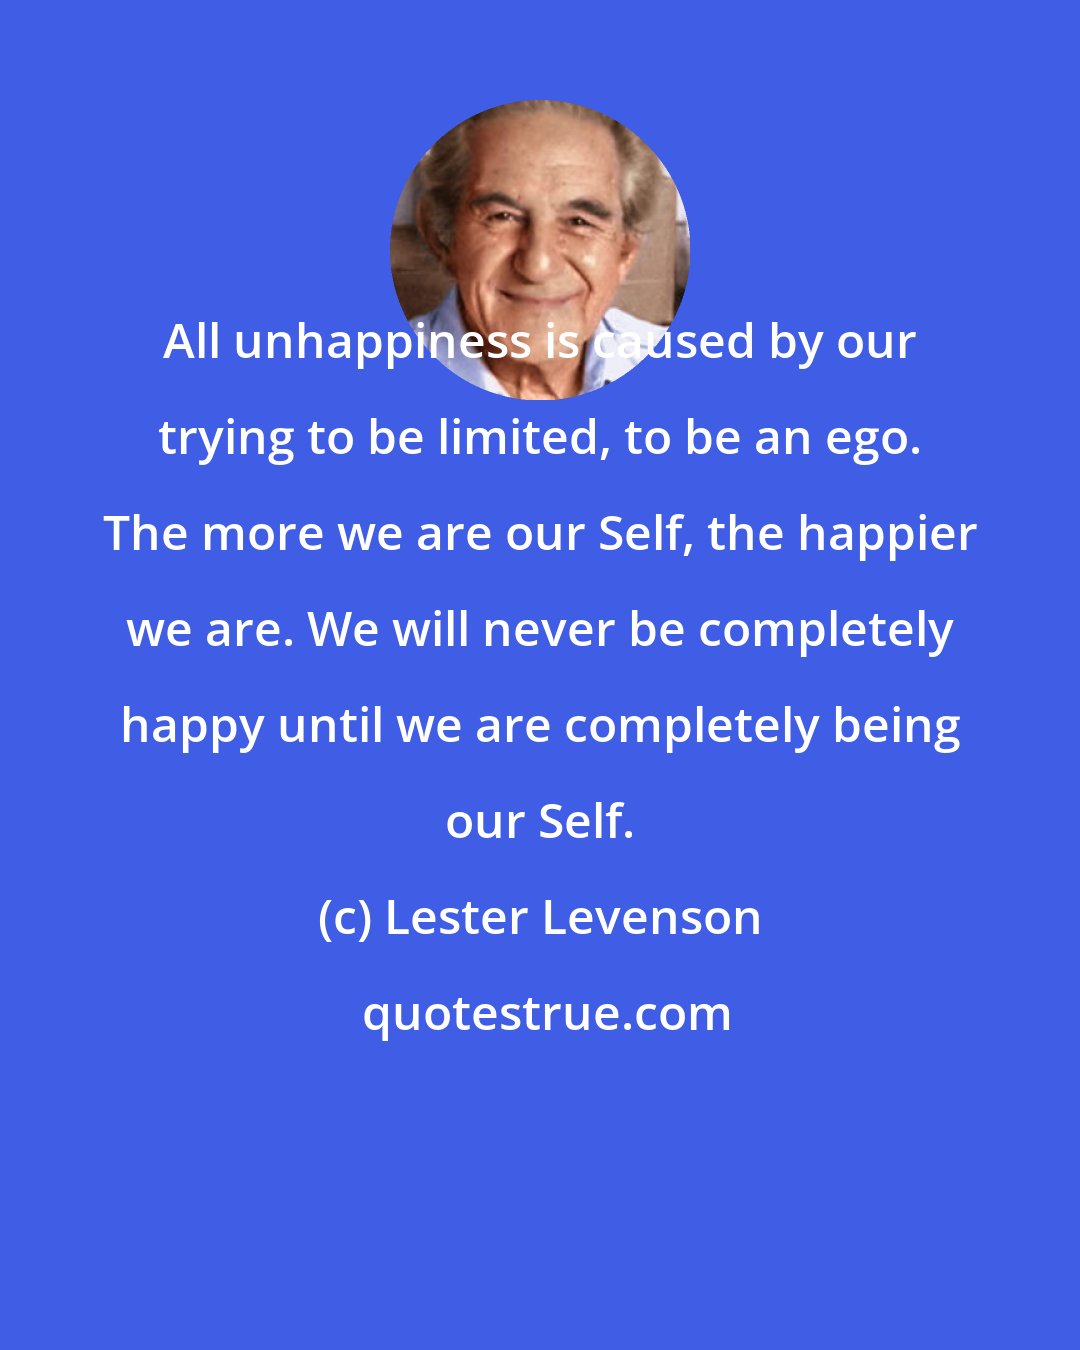 Lester Levenson: All unhappiness is caused by our trying to be limited, to be an ego. The more we are our Self, the happier we are. We will never be completely happy until we are completely being our Self.